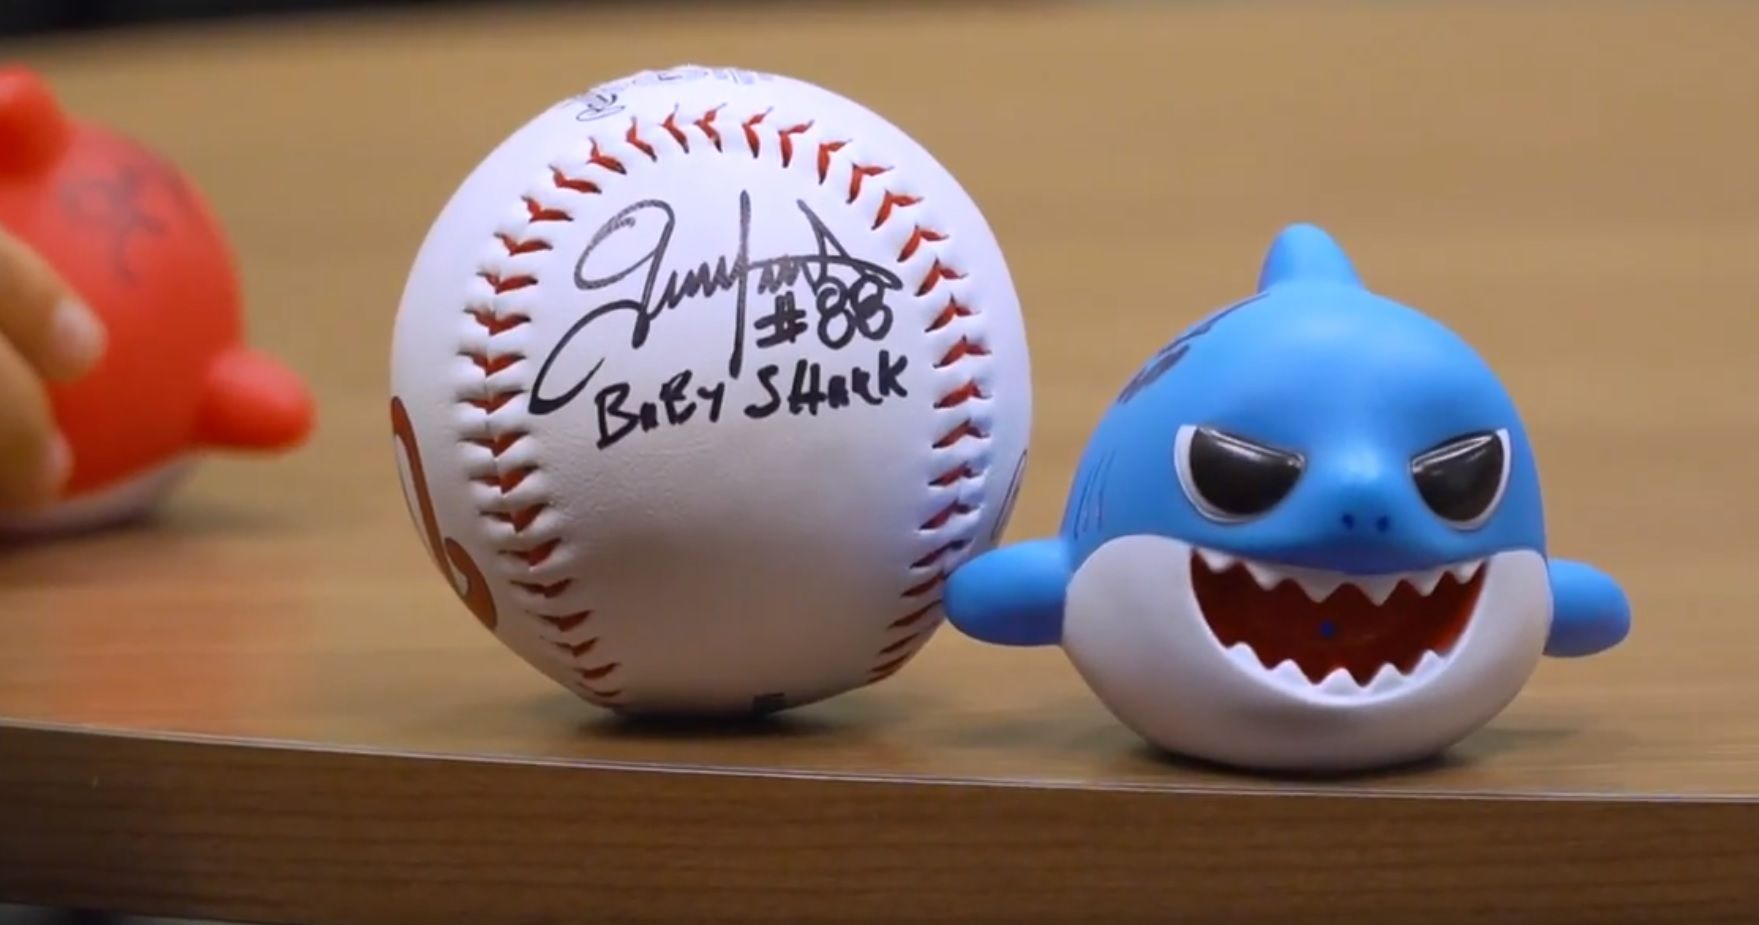 Nationals OF Parra uses Baby Shark as walkup music  YouTube